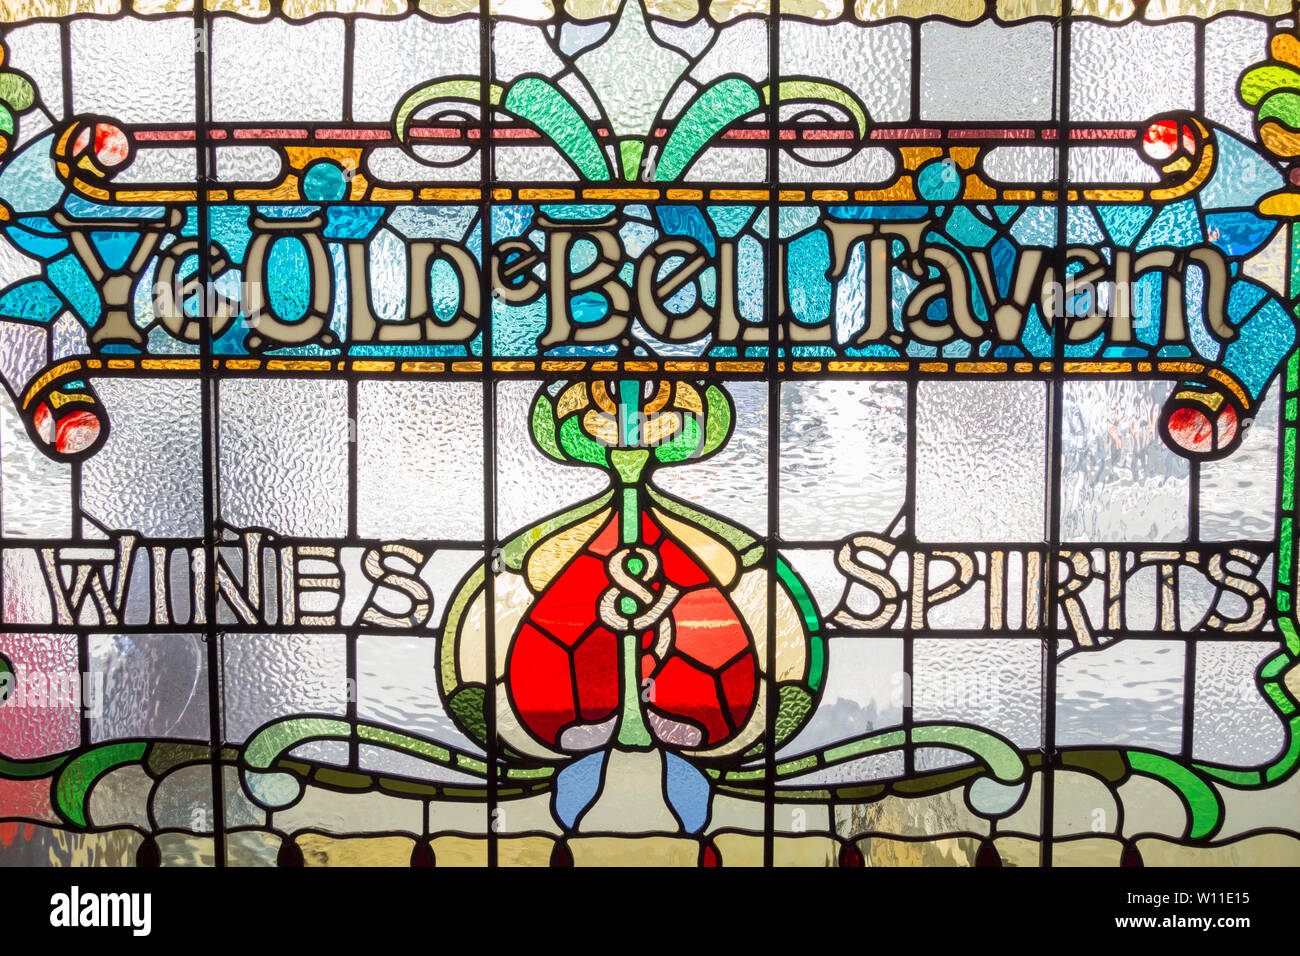 A stained glass window in the Old Bell Tavern on Fleet Street, London, England, UK Stock Photo